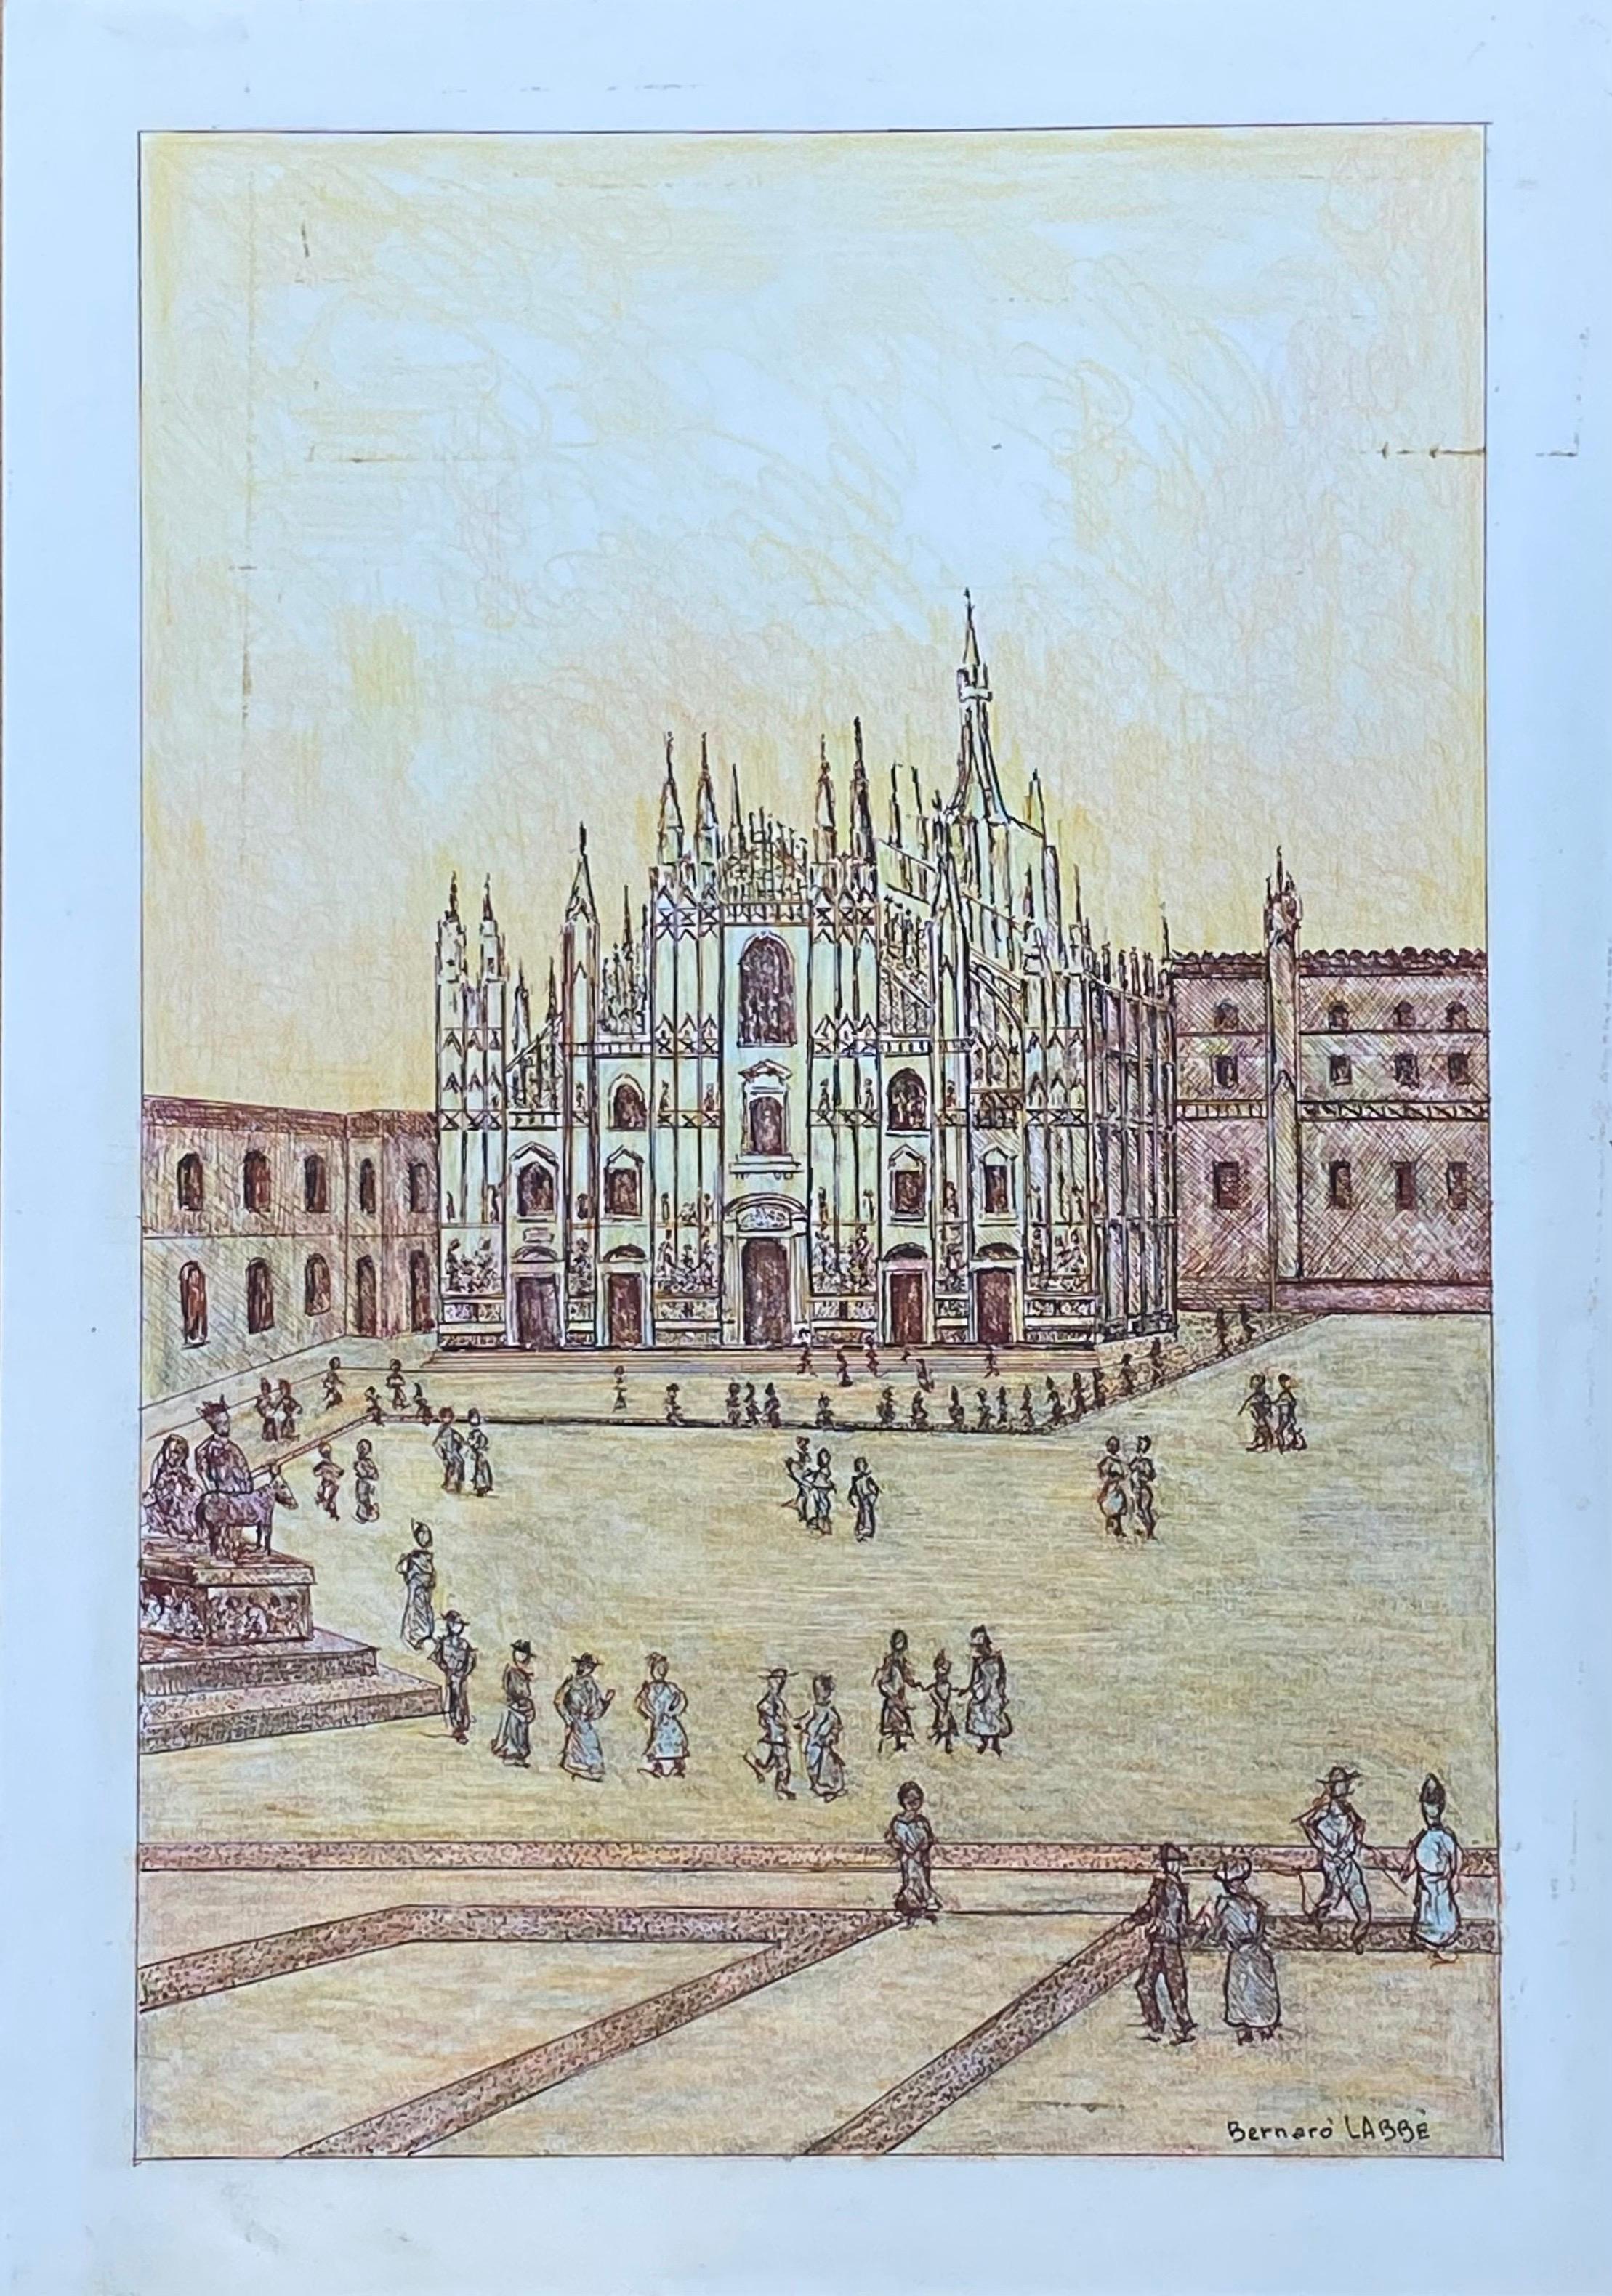 Milan Cathedral
by Bernard Labbe (French mid 20th century)
signed original watercolour/ gouache painting on paper, unframed
size: 16.5 x 11.75 inches
condition: very good and ready to be enjoyed. 

provenance: the artists atelier/ studio,